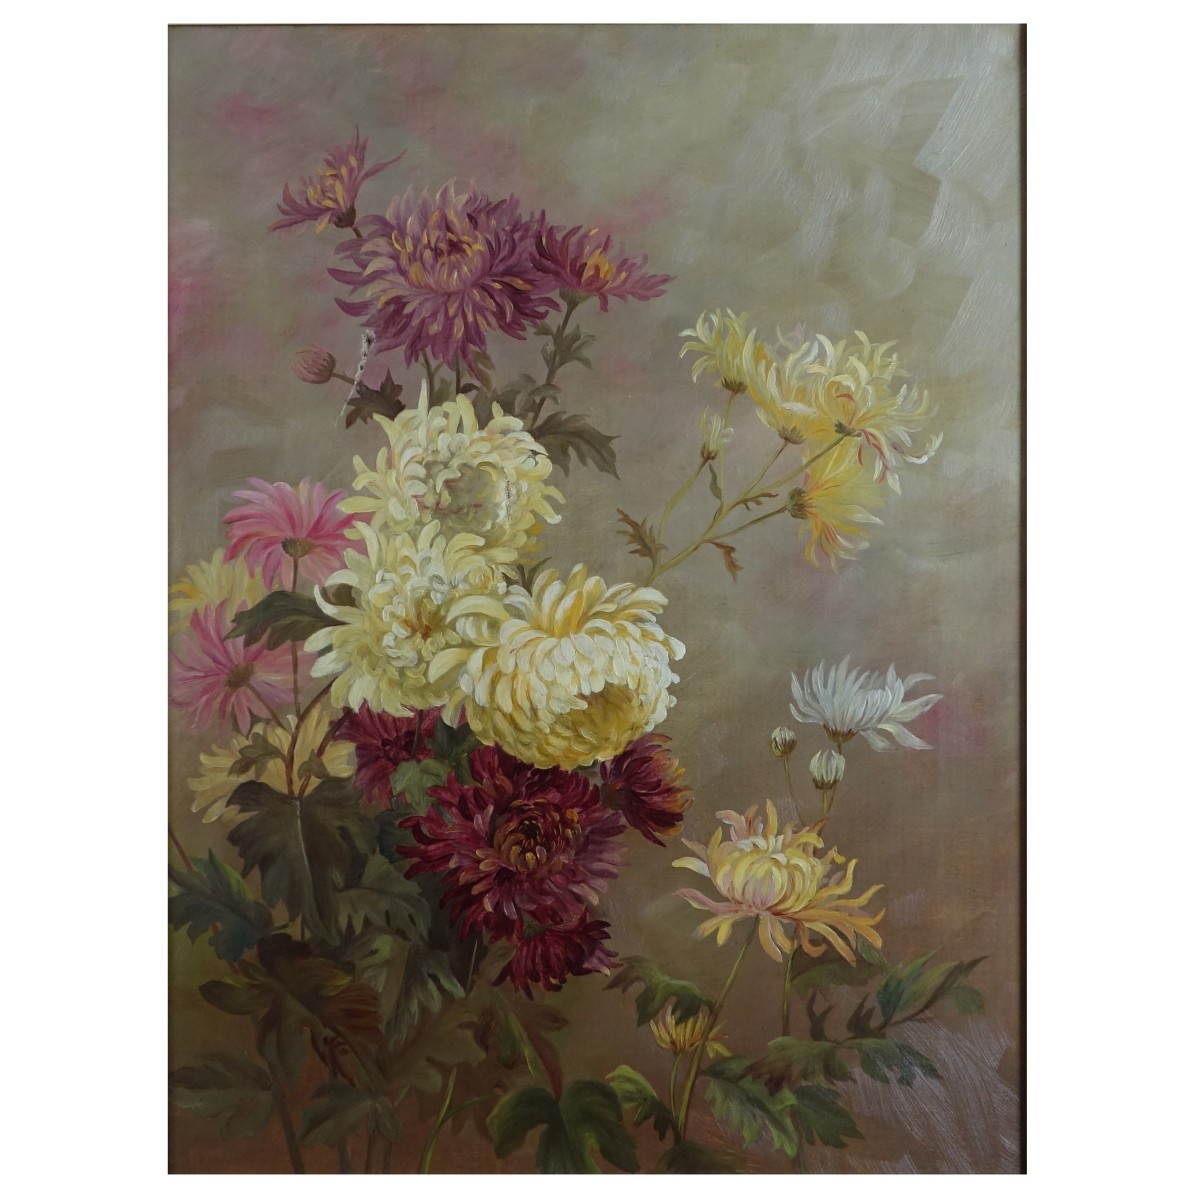 Antique Oil on Canvas "Still Life Flowers"